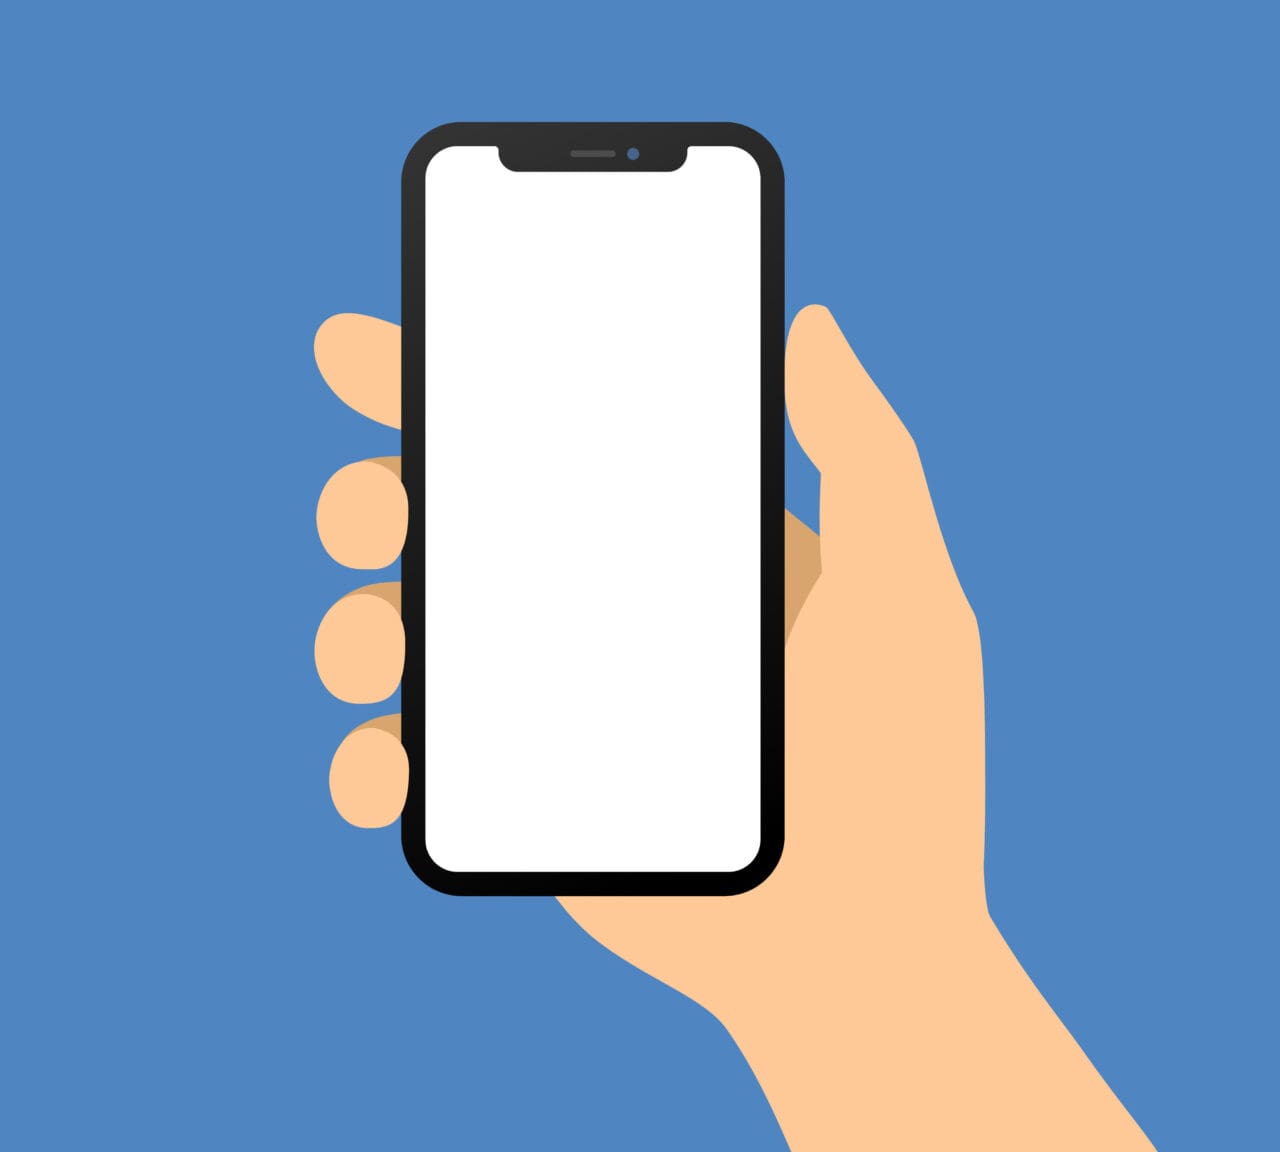 Cartoon image of hand holding mobile phone